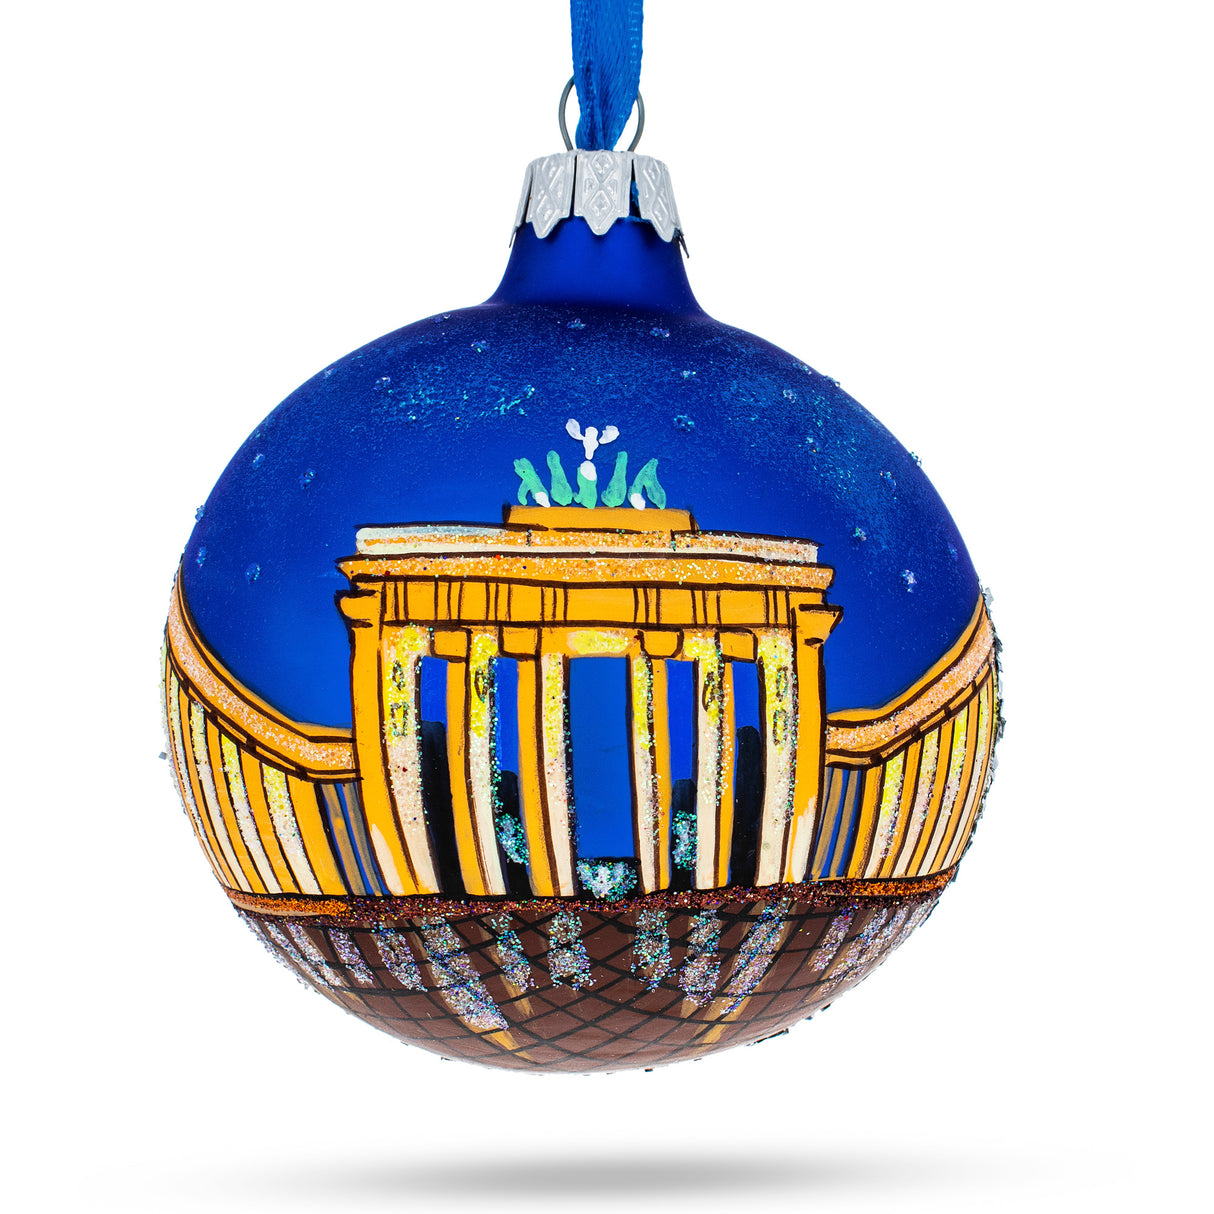 Berlin, Germany (Brandenburg Gate) Glass Ball Christmas Ornament 3.25 Inches in Multi color, Round shape